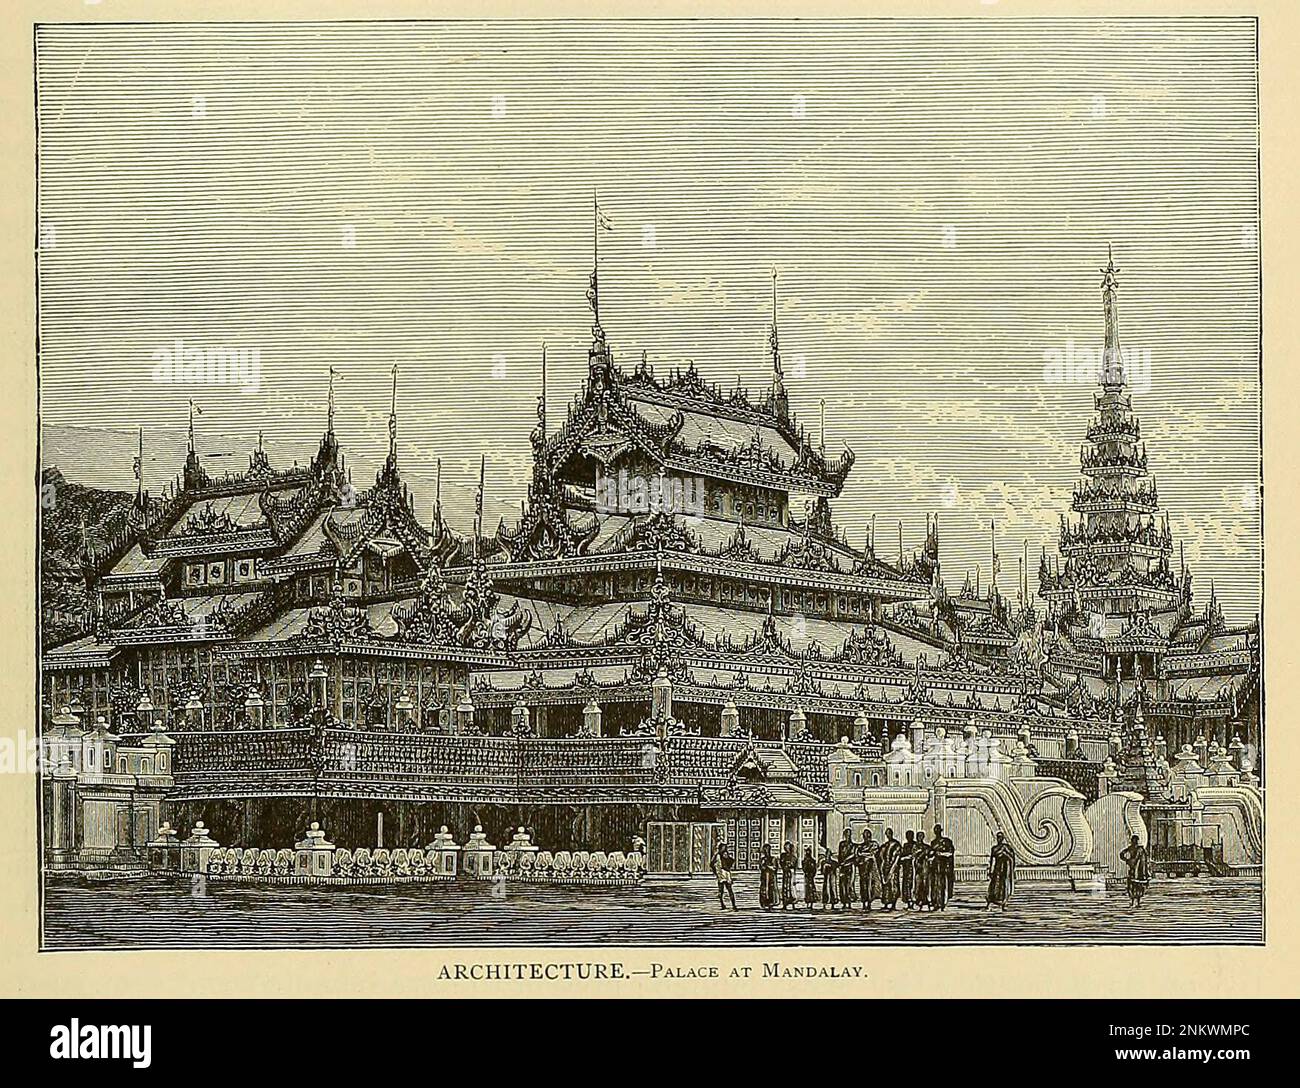 Architecture - Palace at Mandalay The Brown Races Malayo-Mongoloids from Cyclopedia universal history : embracing the most complete and recent presentation of the subject in two principal parts or divisions of more than six thousand pages by John Clark Ridpath, 1840-1900 Publication date 1895 Publisher Boston : Balch Bros. Volume 6 History of Man and Mankind Stock Photo